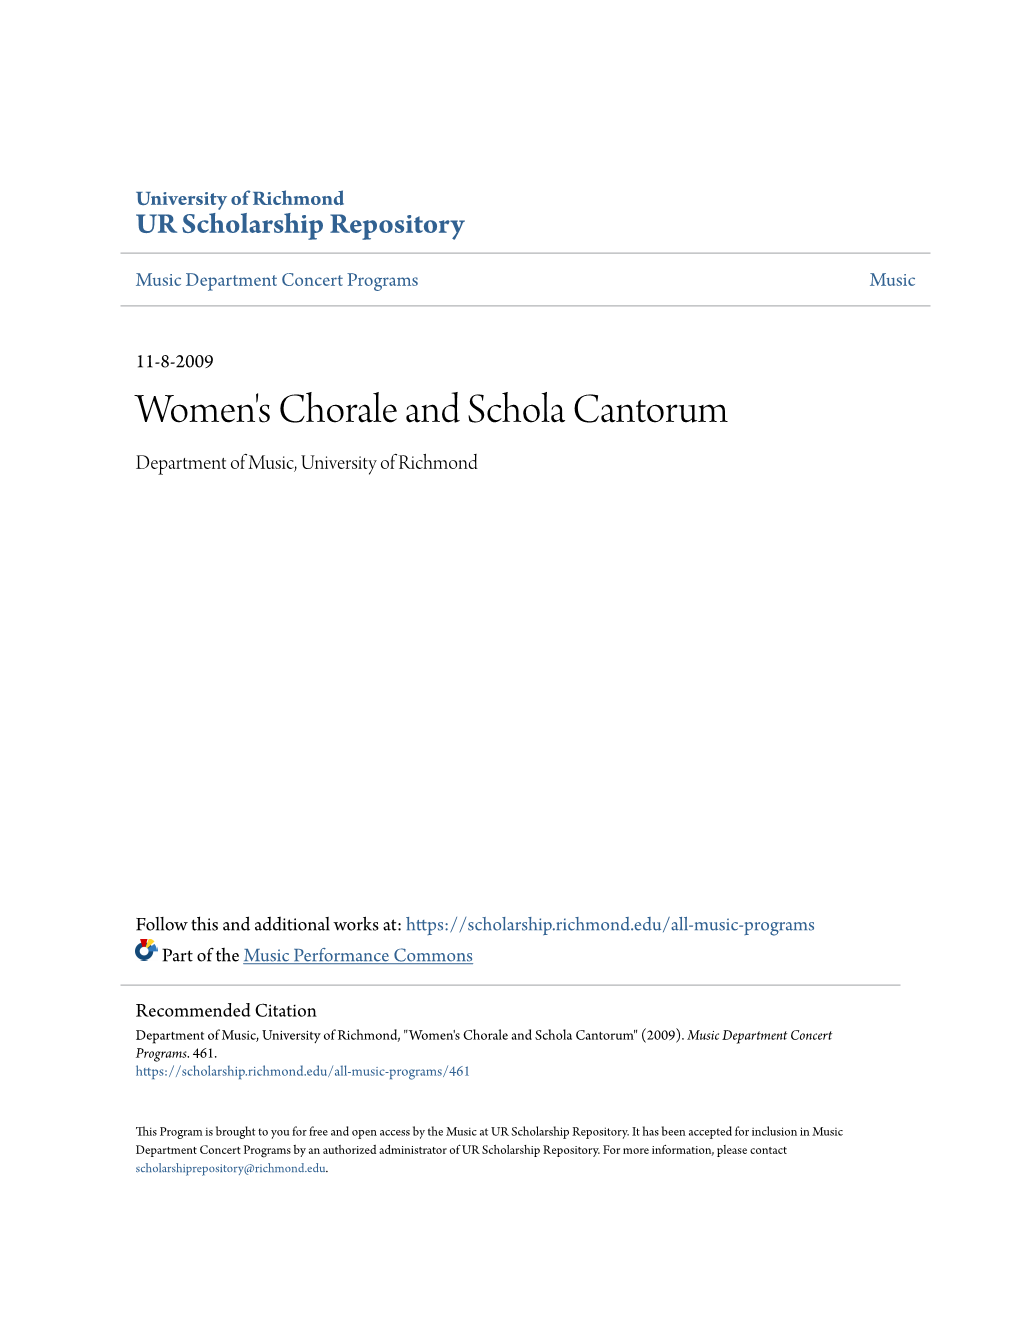 Women's Chorale and Schola Cantorum Department of Music, University of Richmond